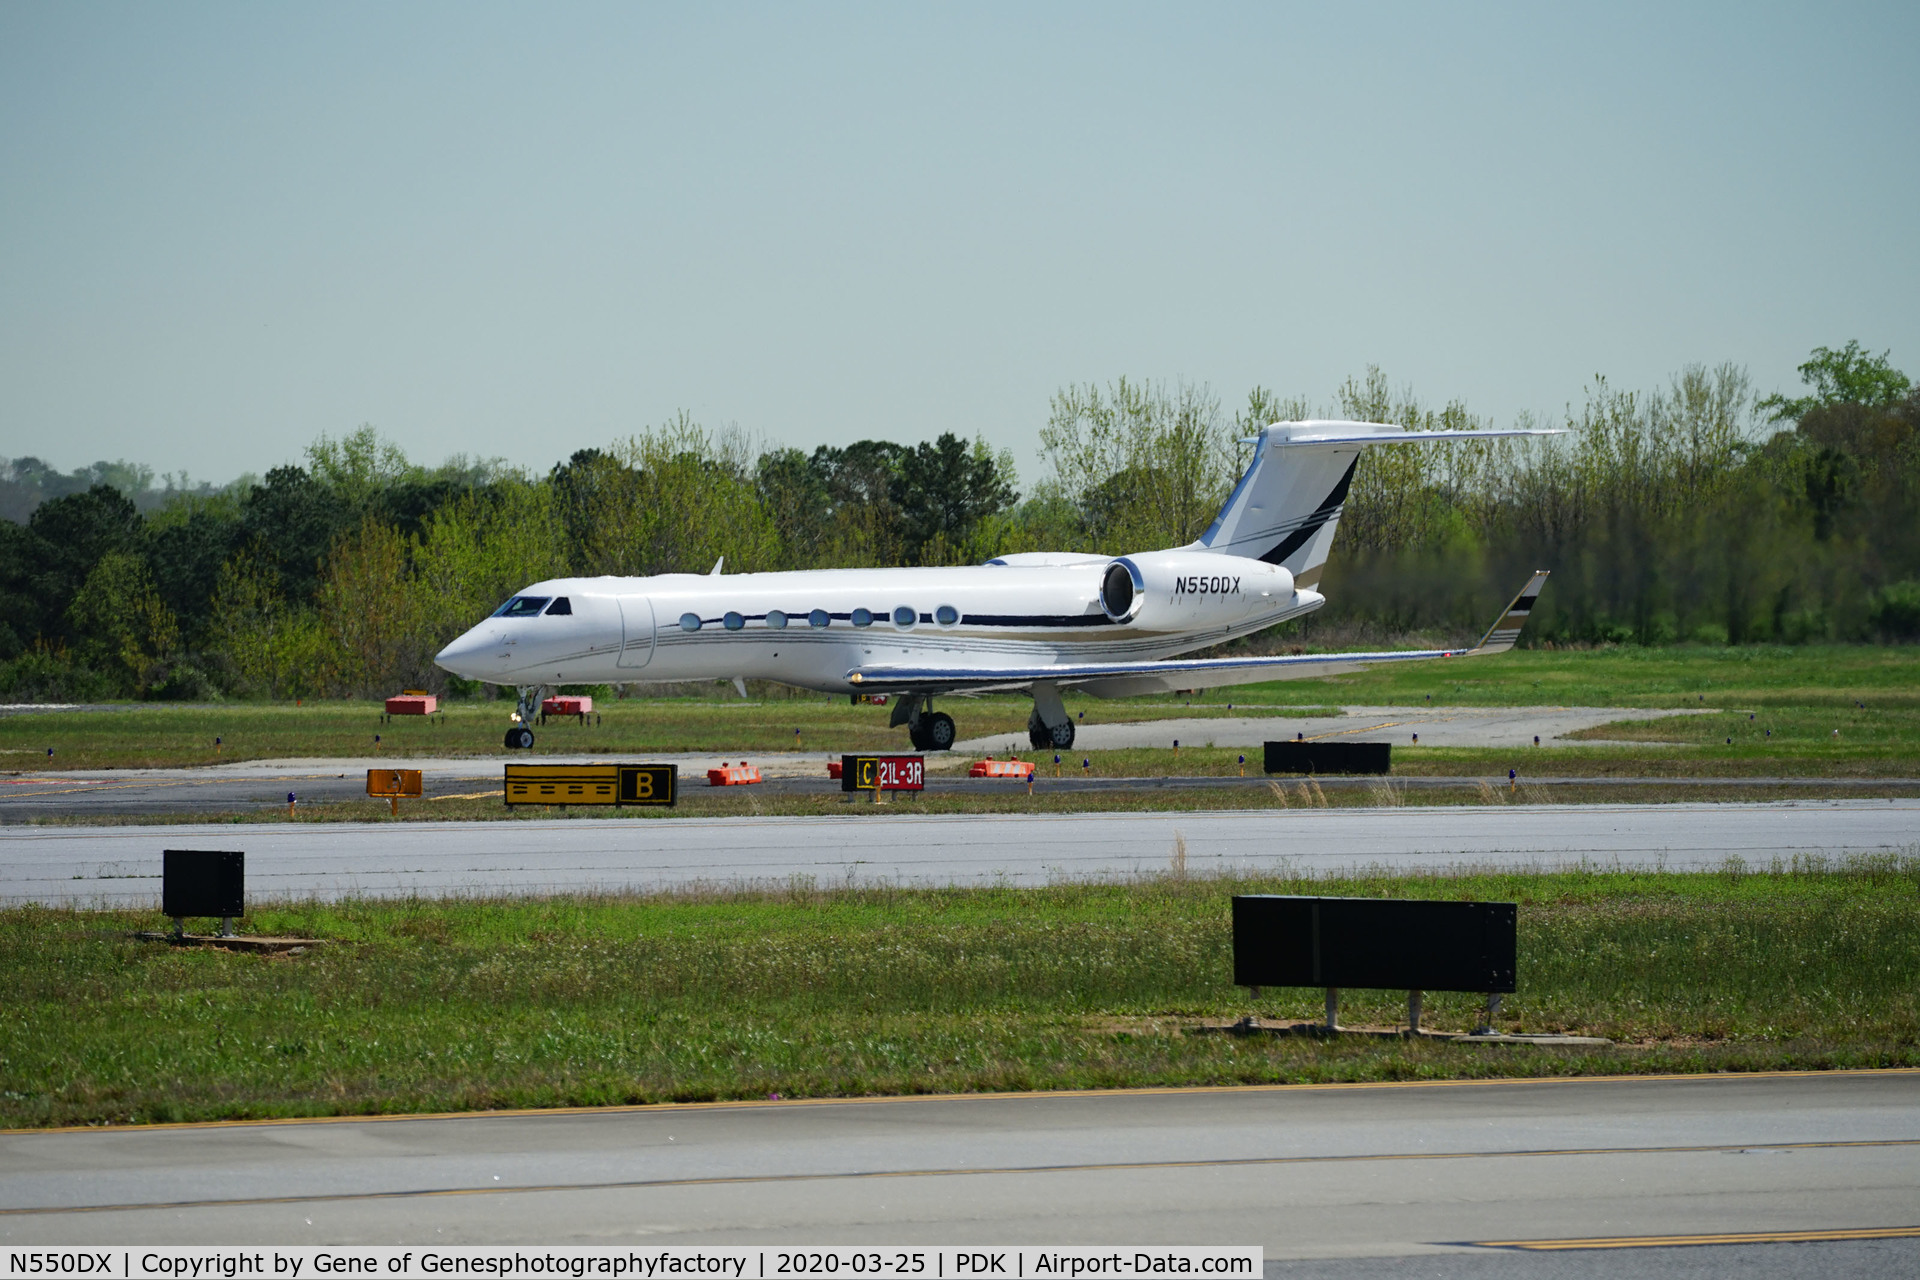 N550DX, 2015 Gulfstream Aerospace GV-SP (G550) C/N 5517, Just starting its take off roll at Dekalb Peachtree Airport, today, 3/25/2020.